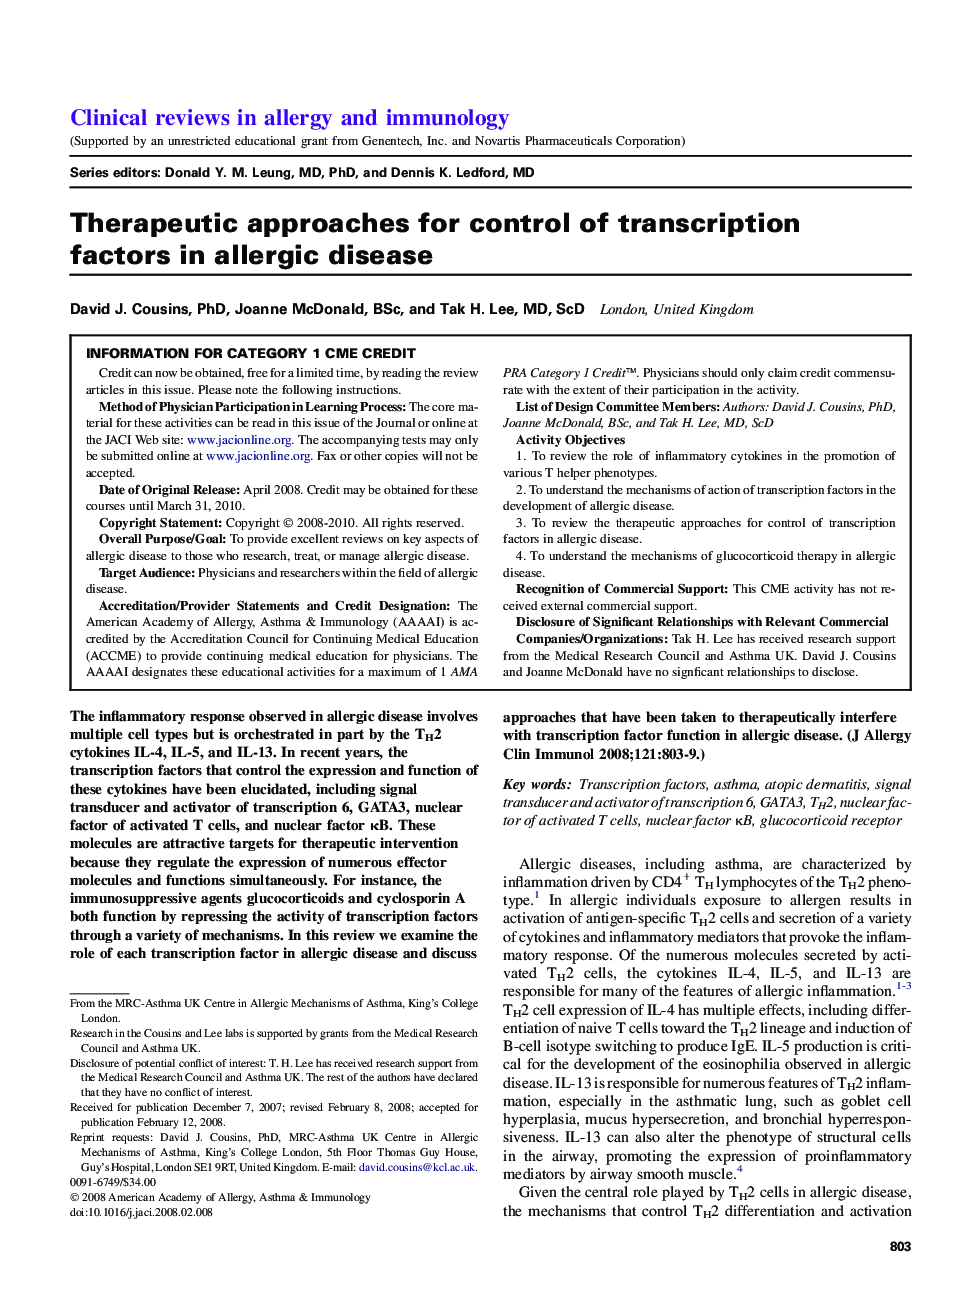 Therapeutic approaches for control of transcription factors in allergic disease 